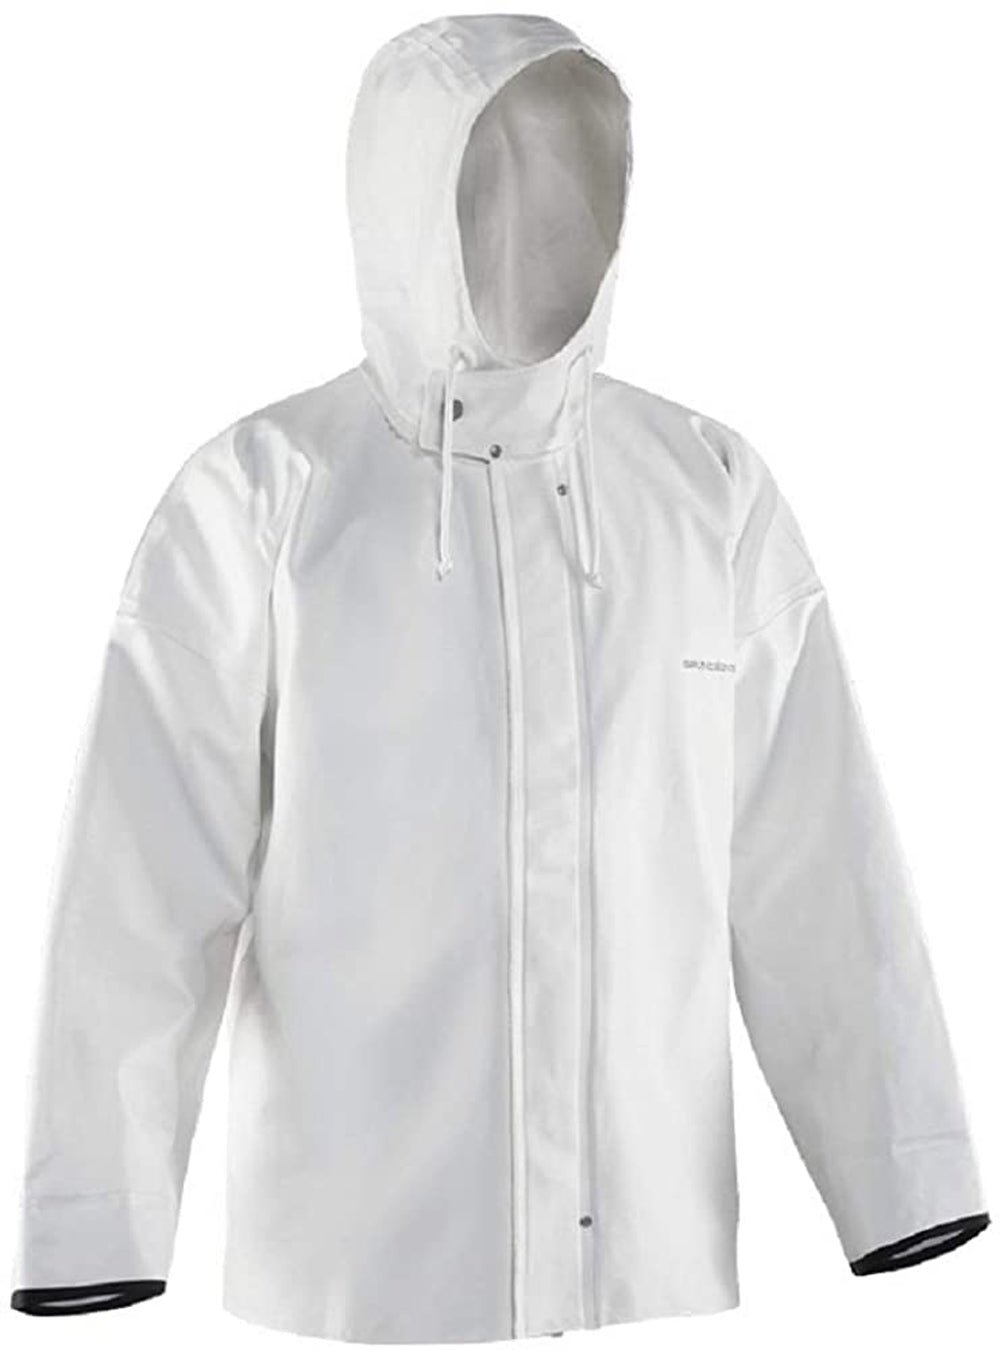 Brigg 44 Tall Jacket in White color from the front view